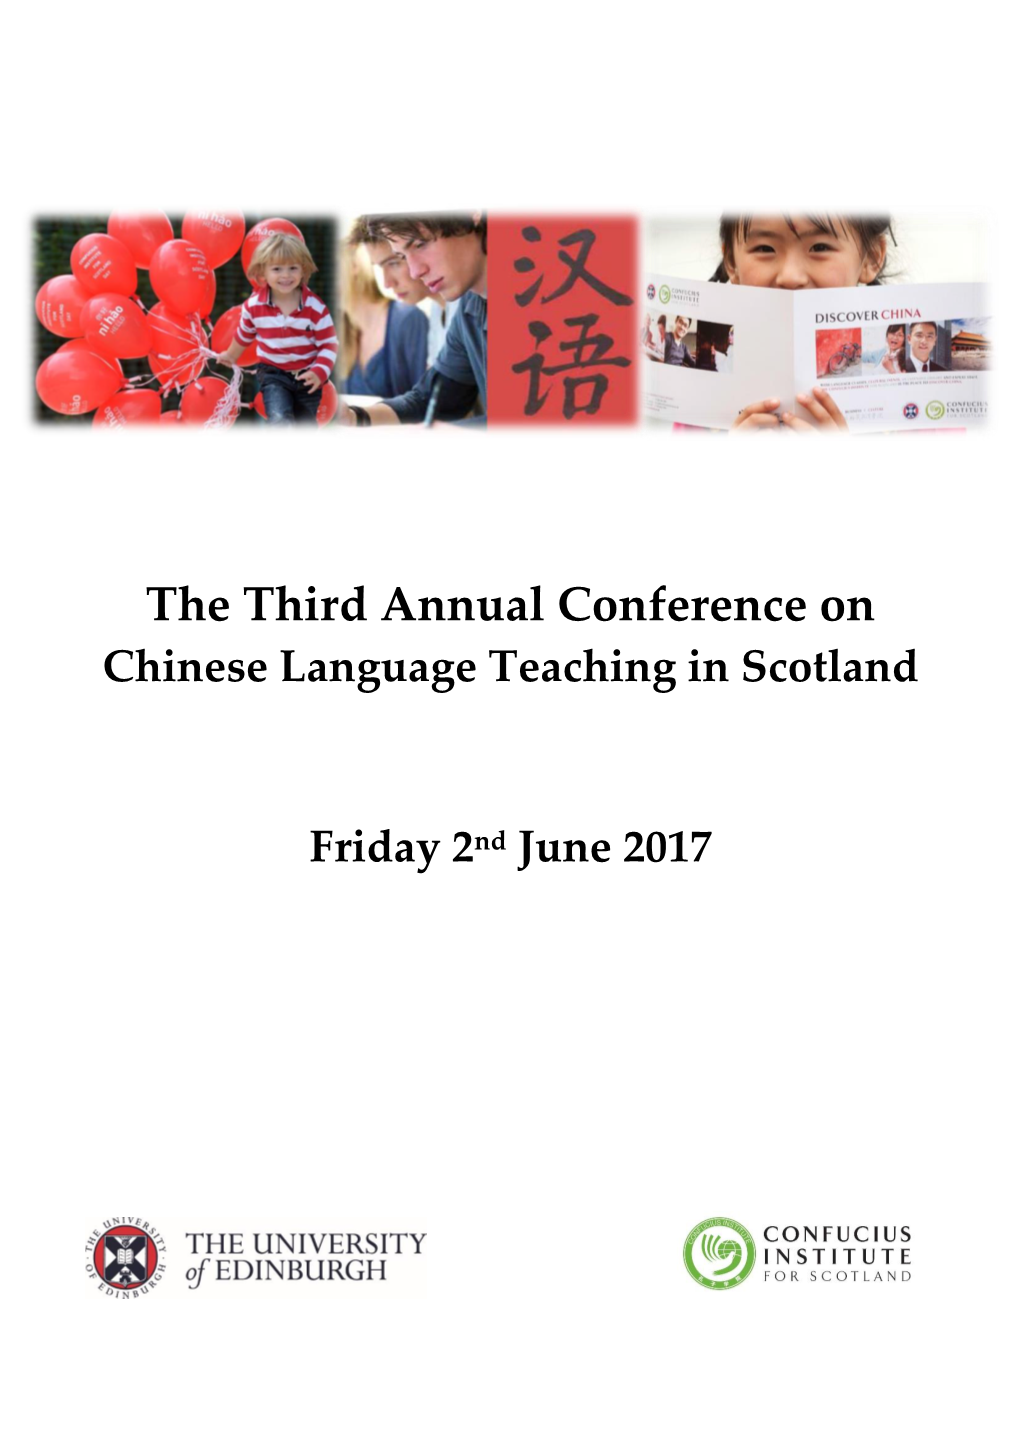 The Third Annual Conference on Chinese Language Teaching in Scotland